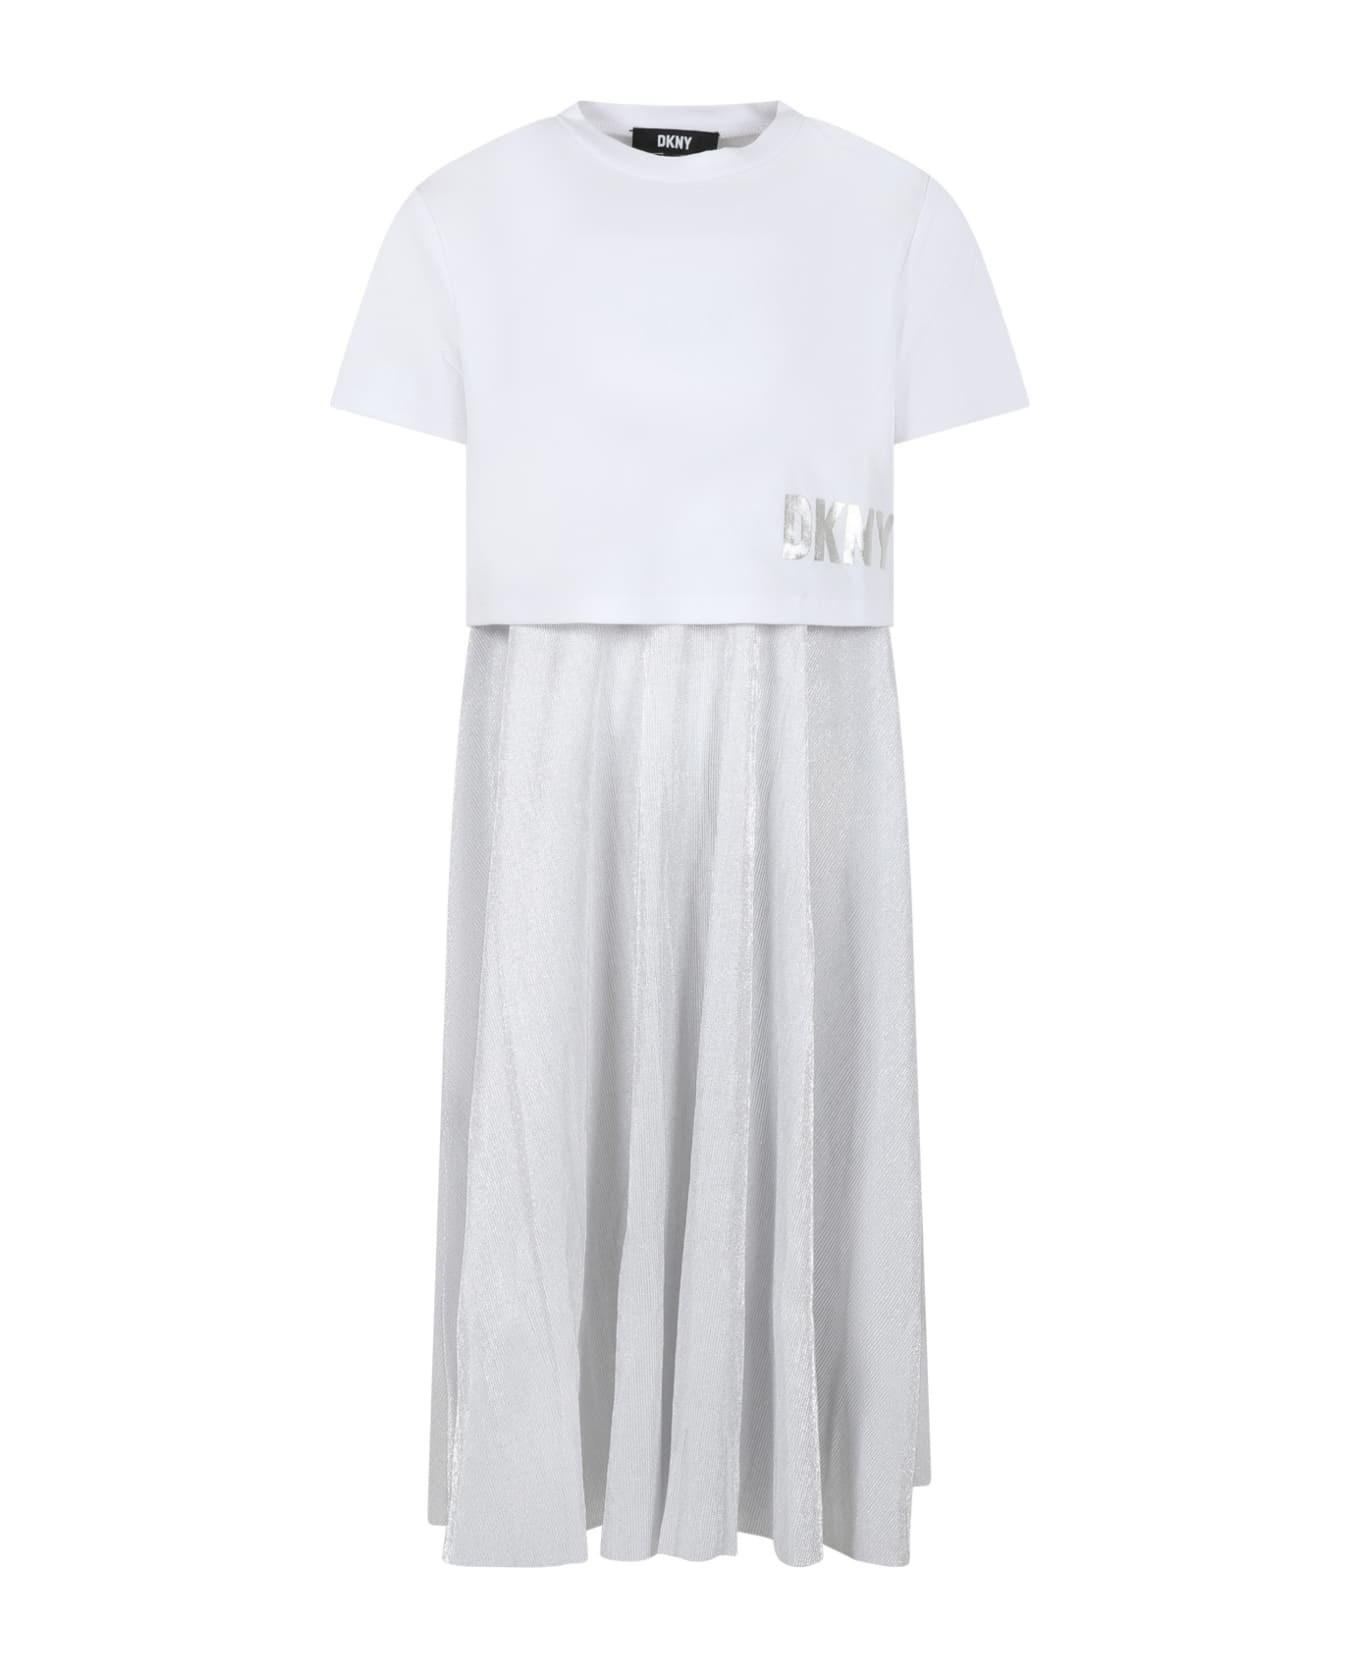 DKNY Casual White Dress For Girl With Logo - Silver ワンピース＆ドレス